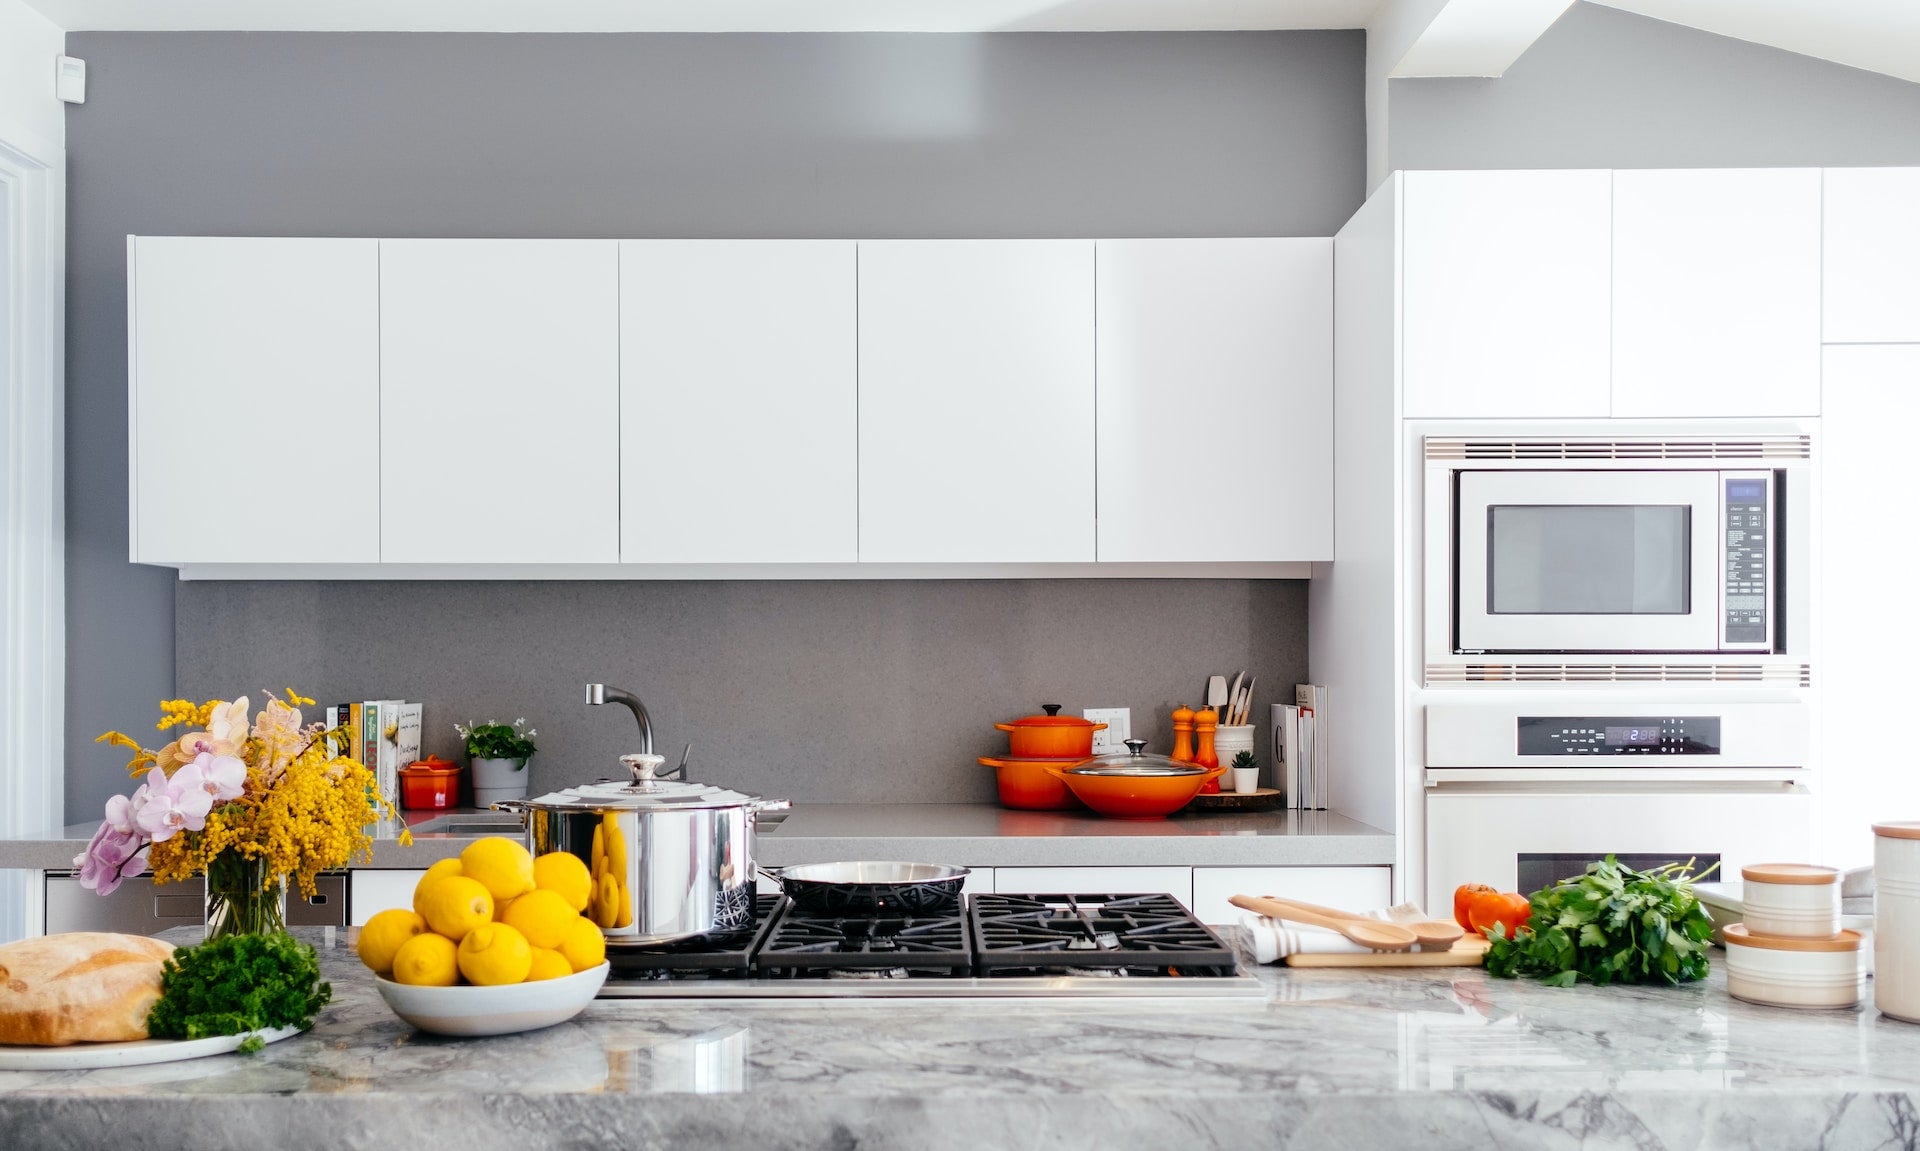 How to Clean and Maintain a Quartz Countertop